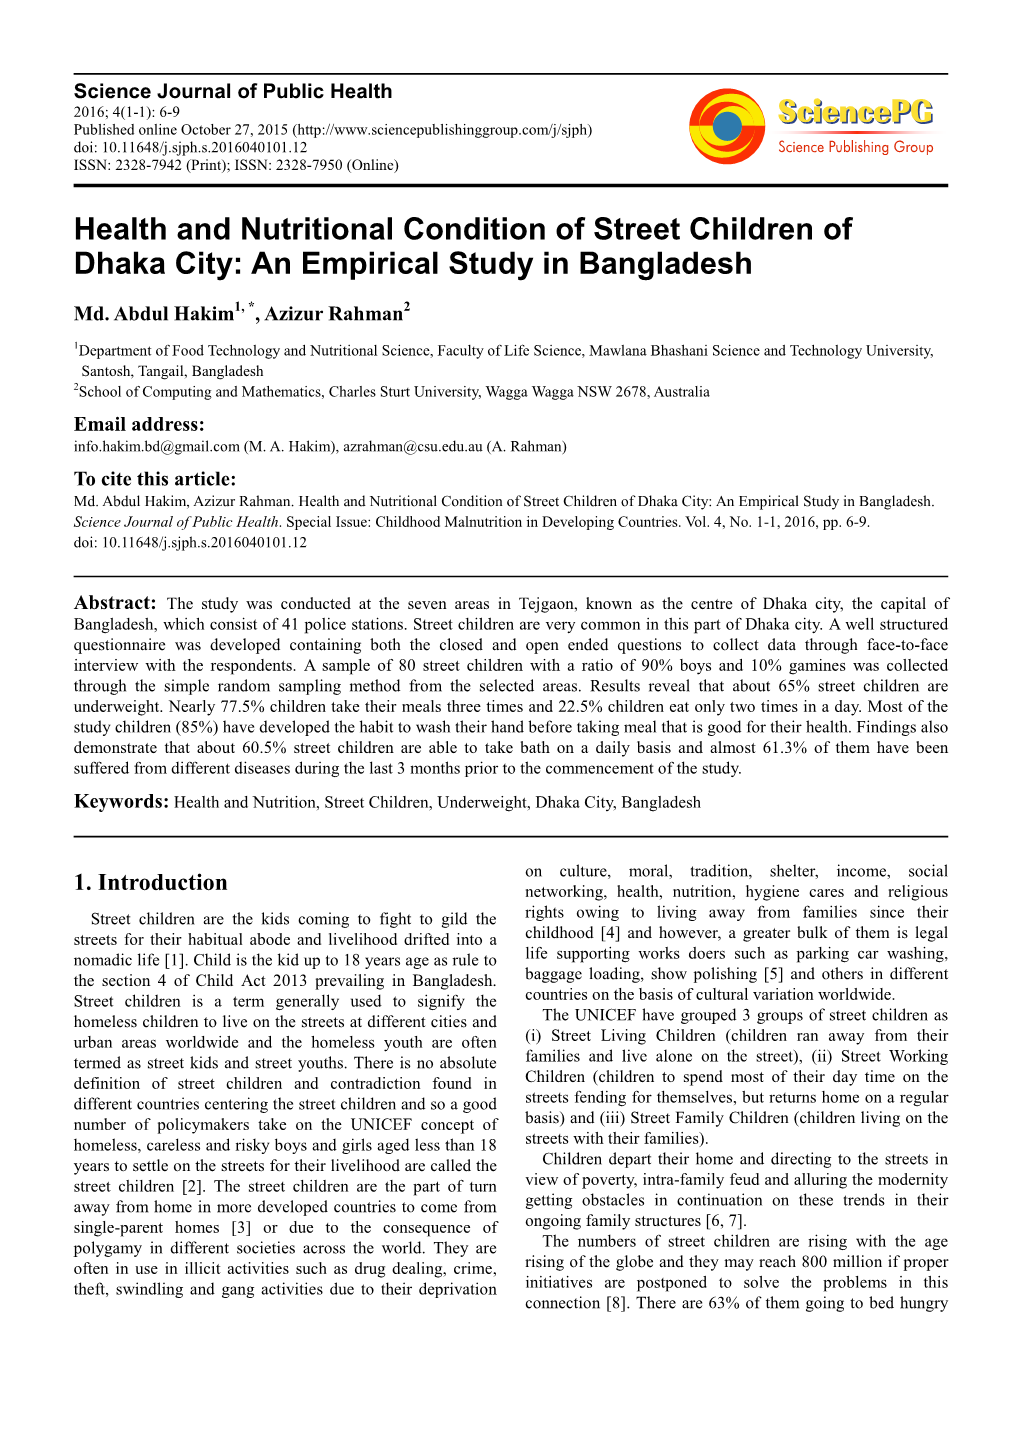 Health and Nutritional Condition of Street Children of Dhaka City: an Empirical Study in Bangladesh